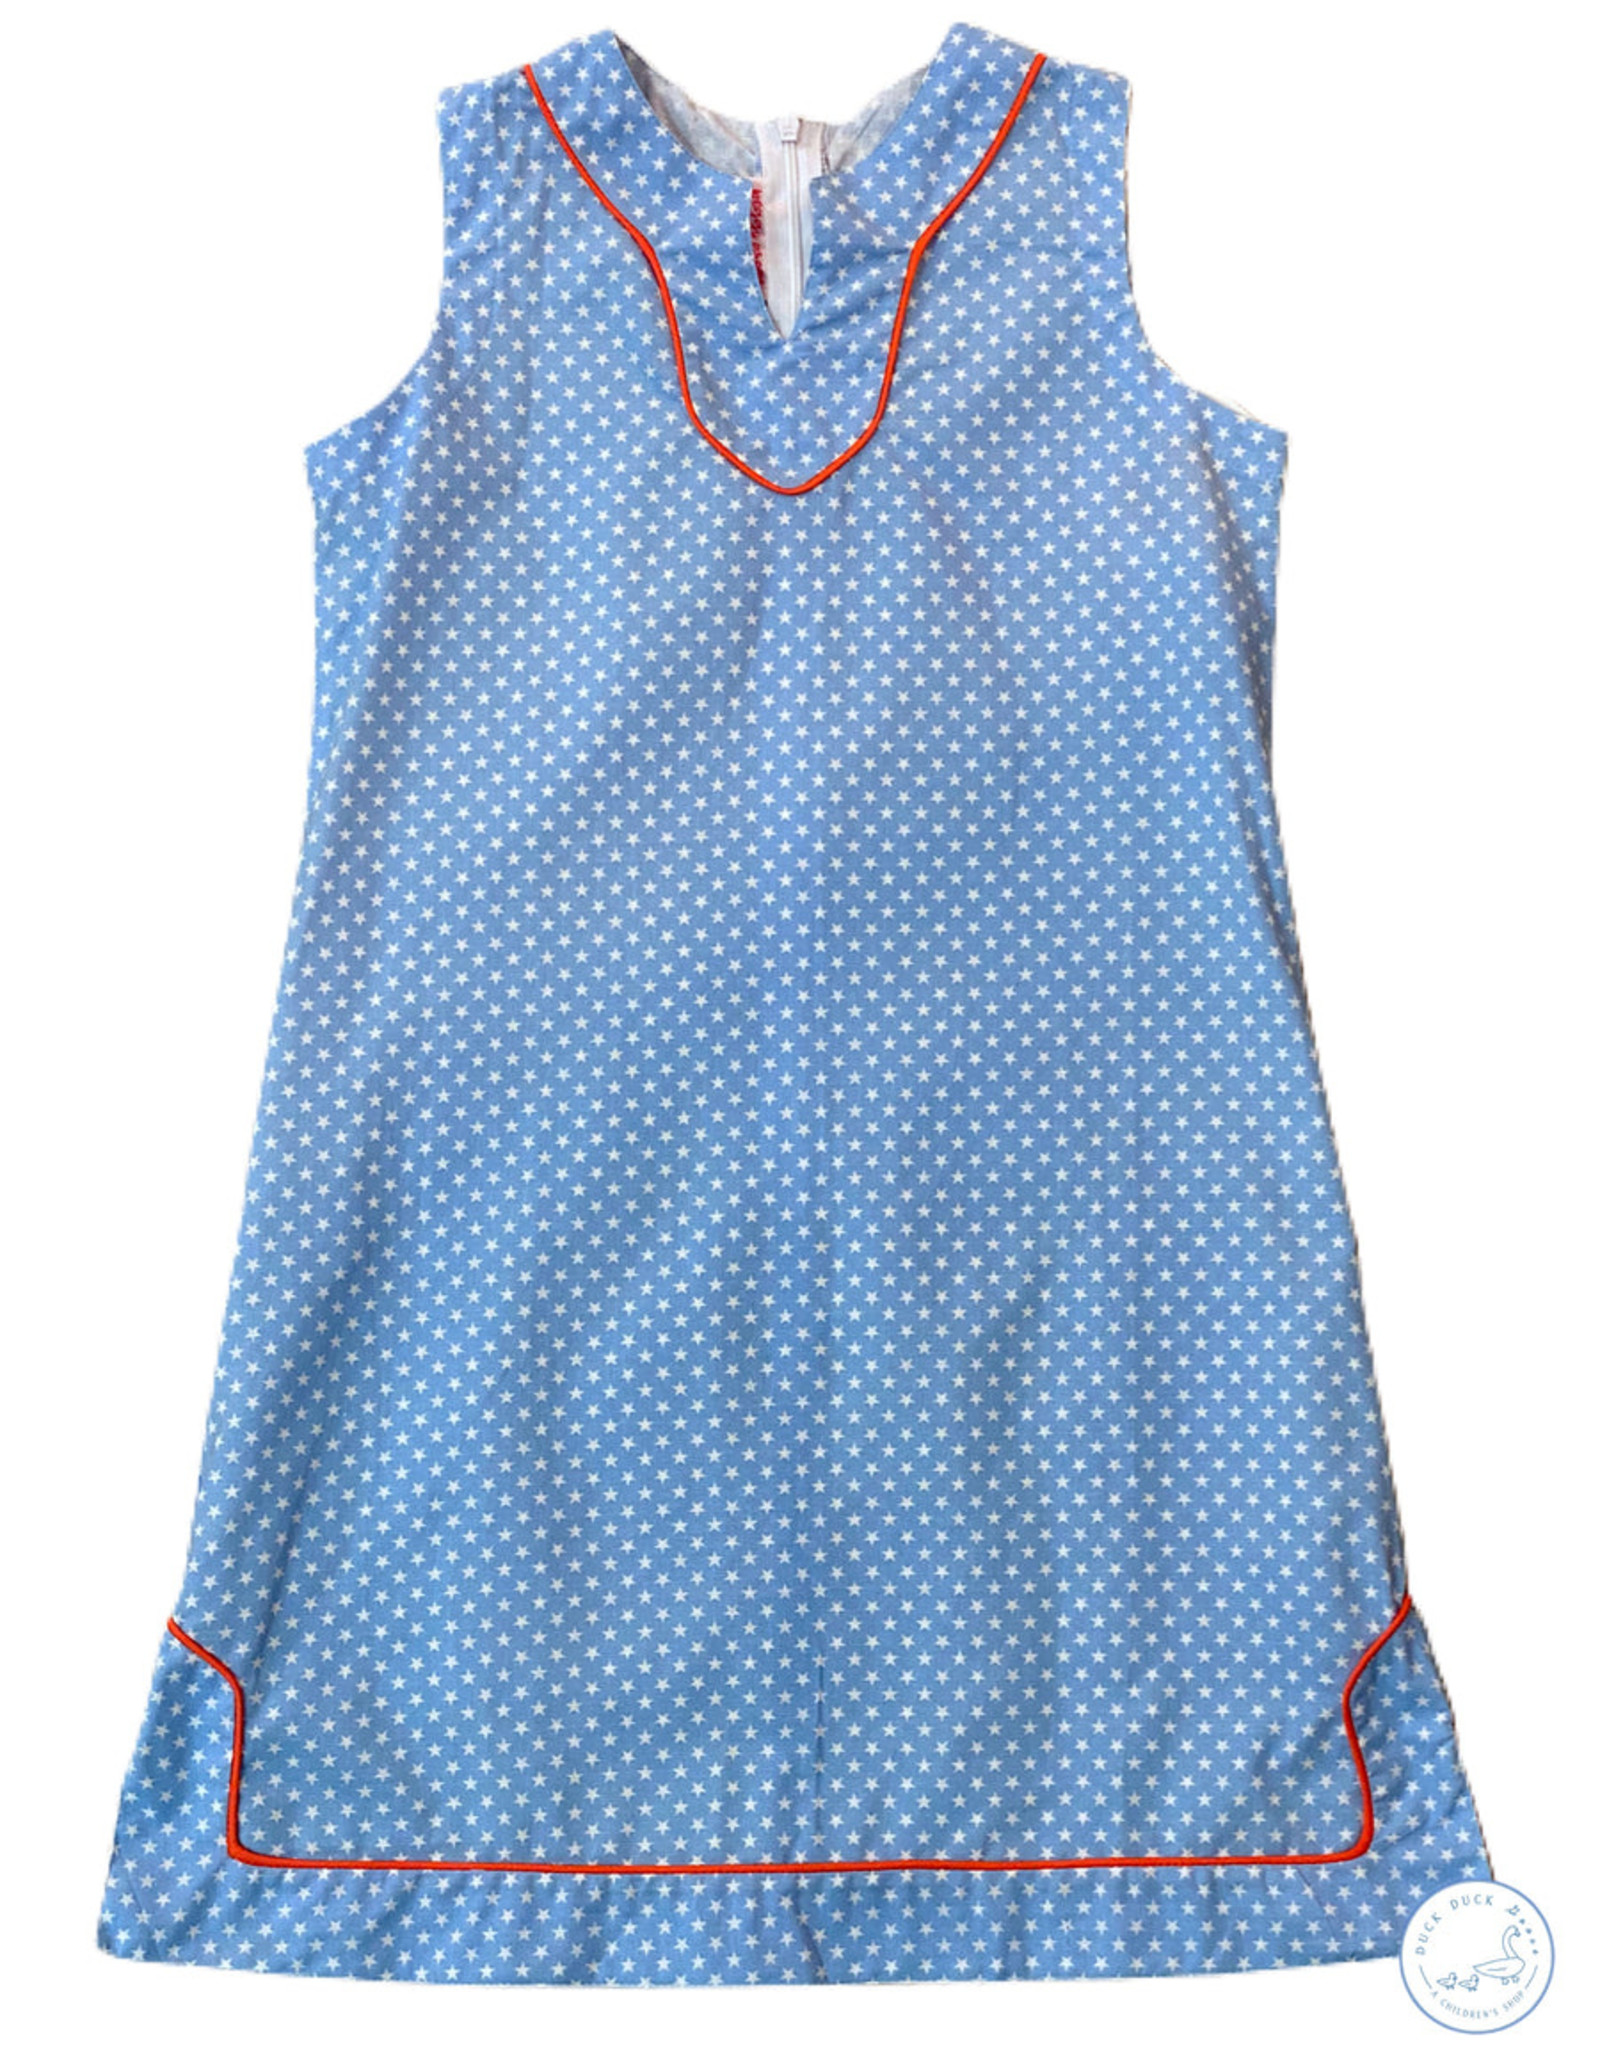 Tunic Dress w/ Banner Stars and Watermelon Piping, 10